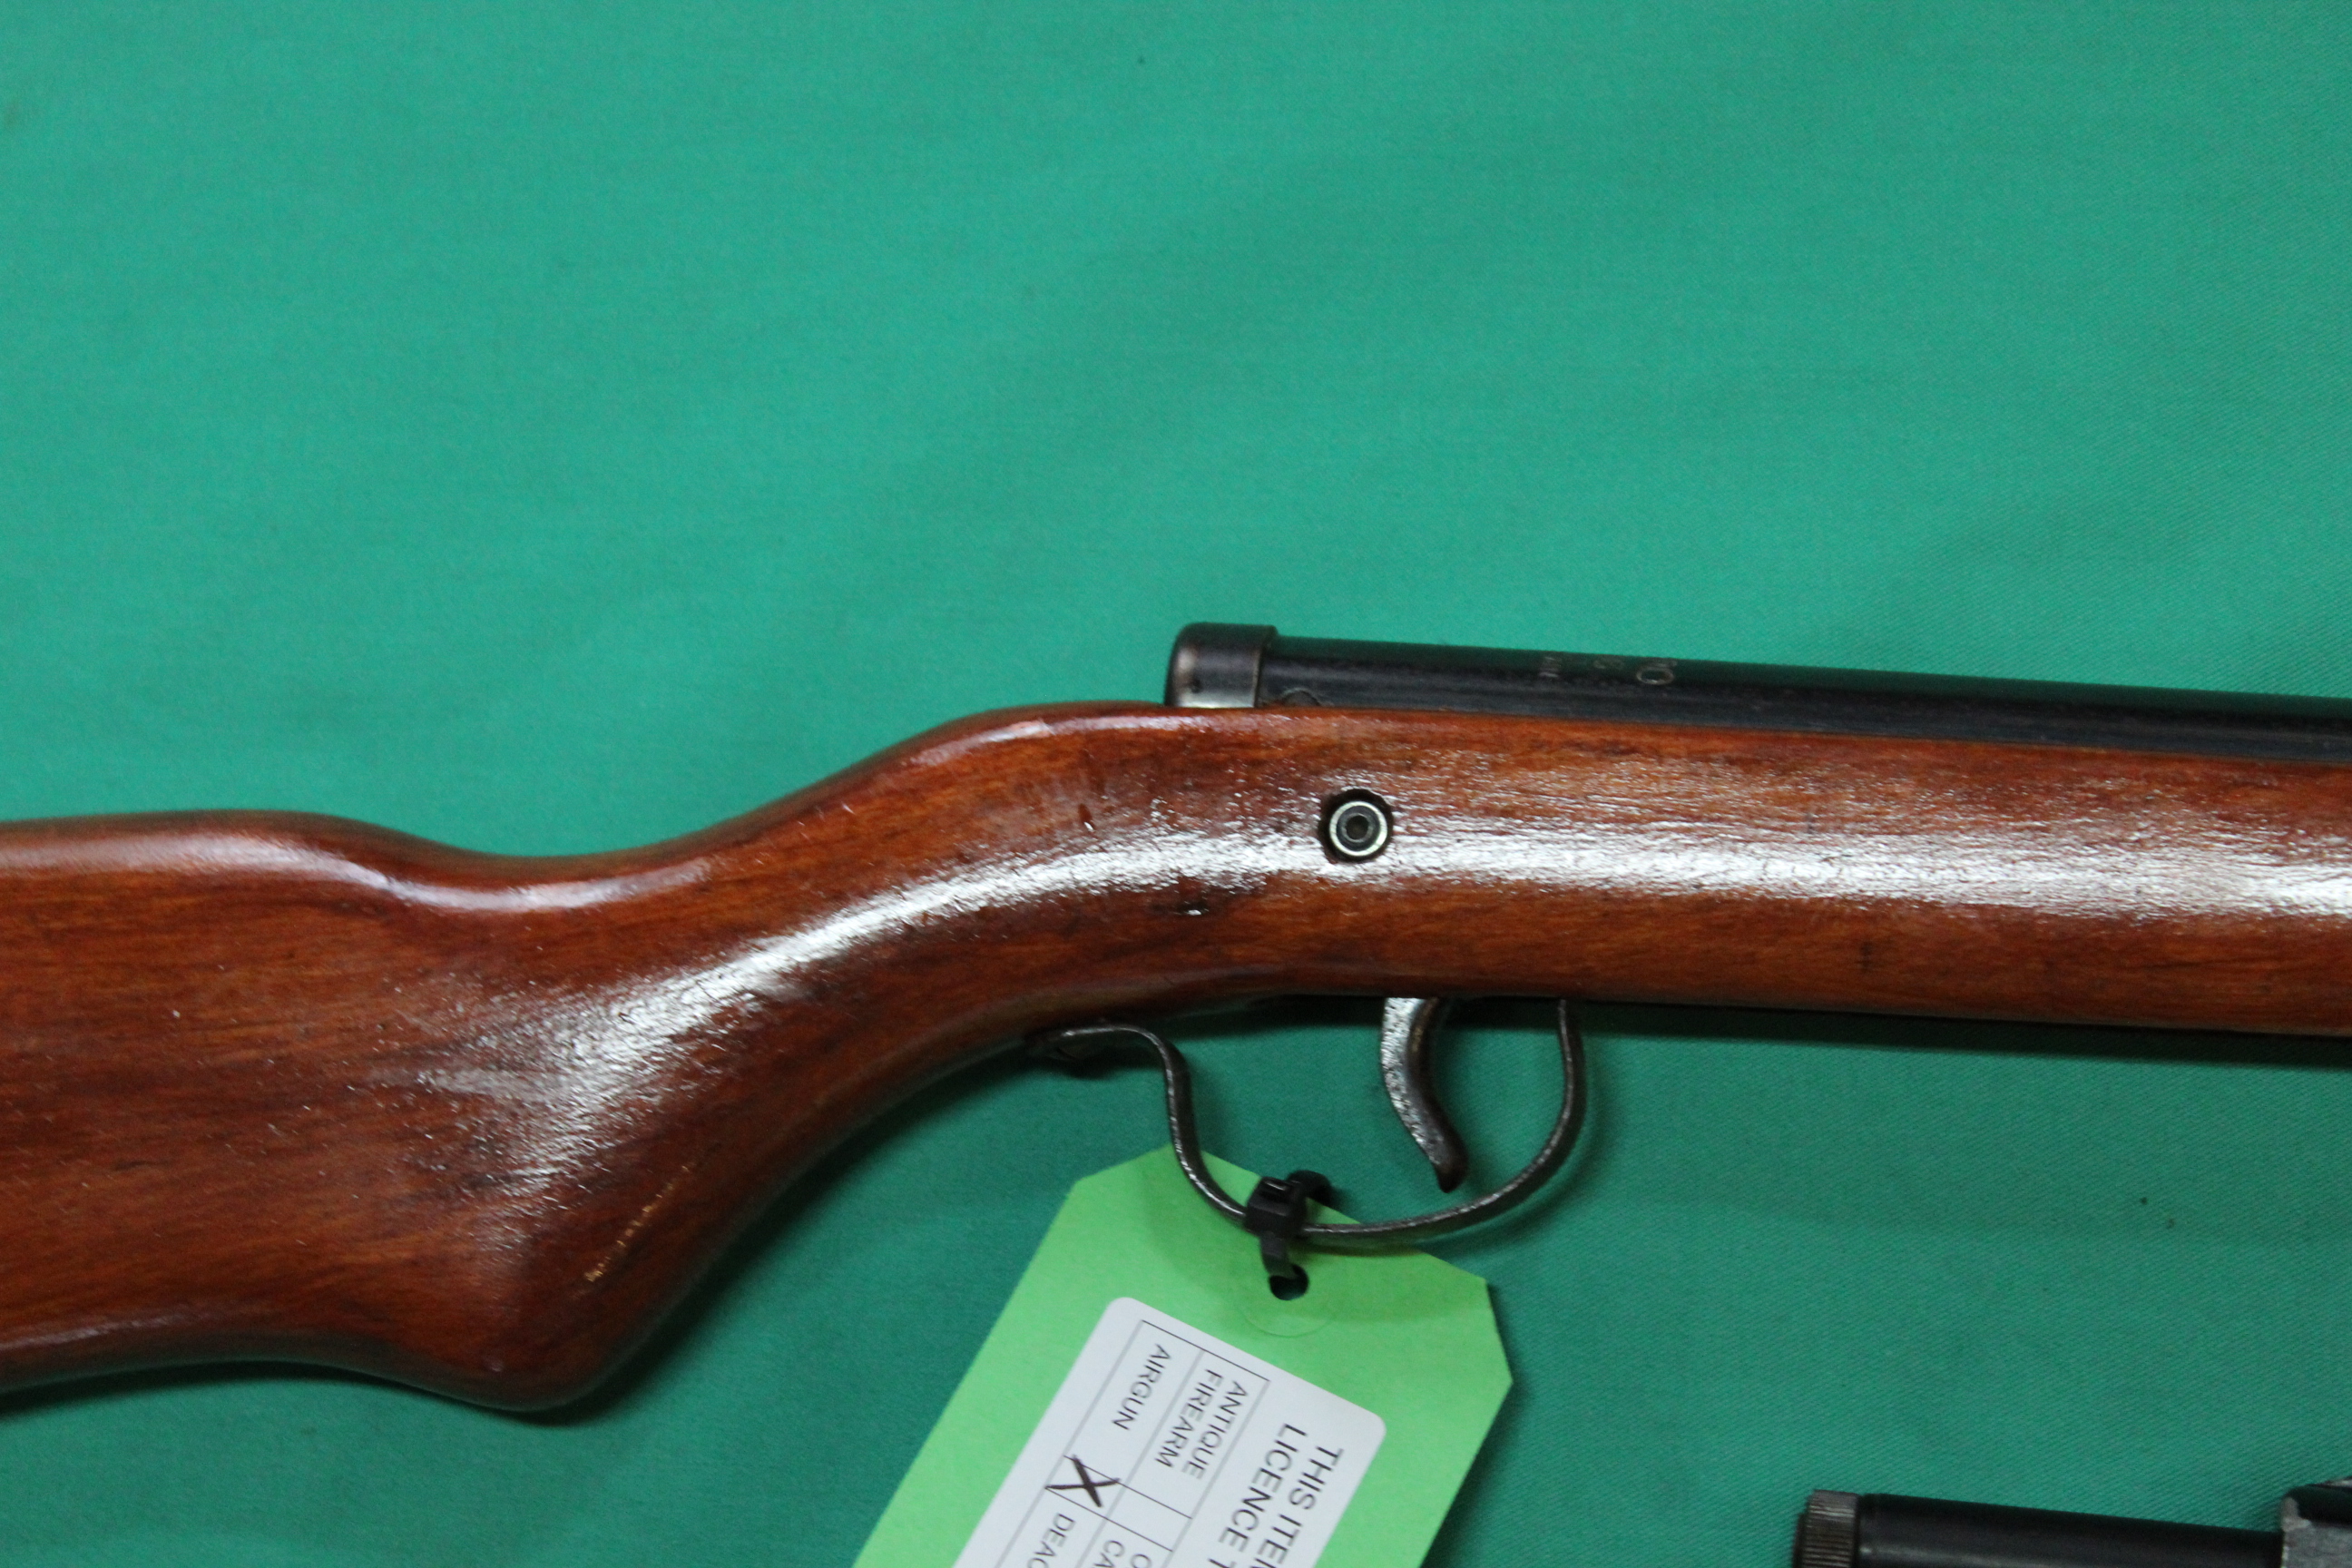 A Milbro Mod 16 air rifle, made 1971 with a Diana SP50 air pistol, - Image 3 of 3